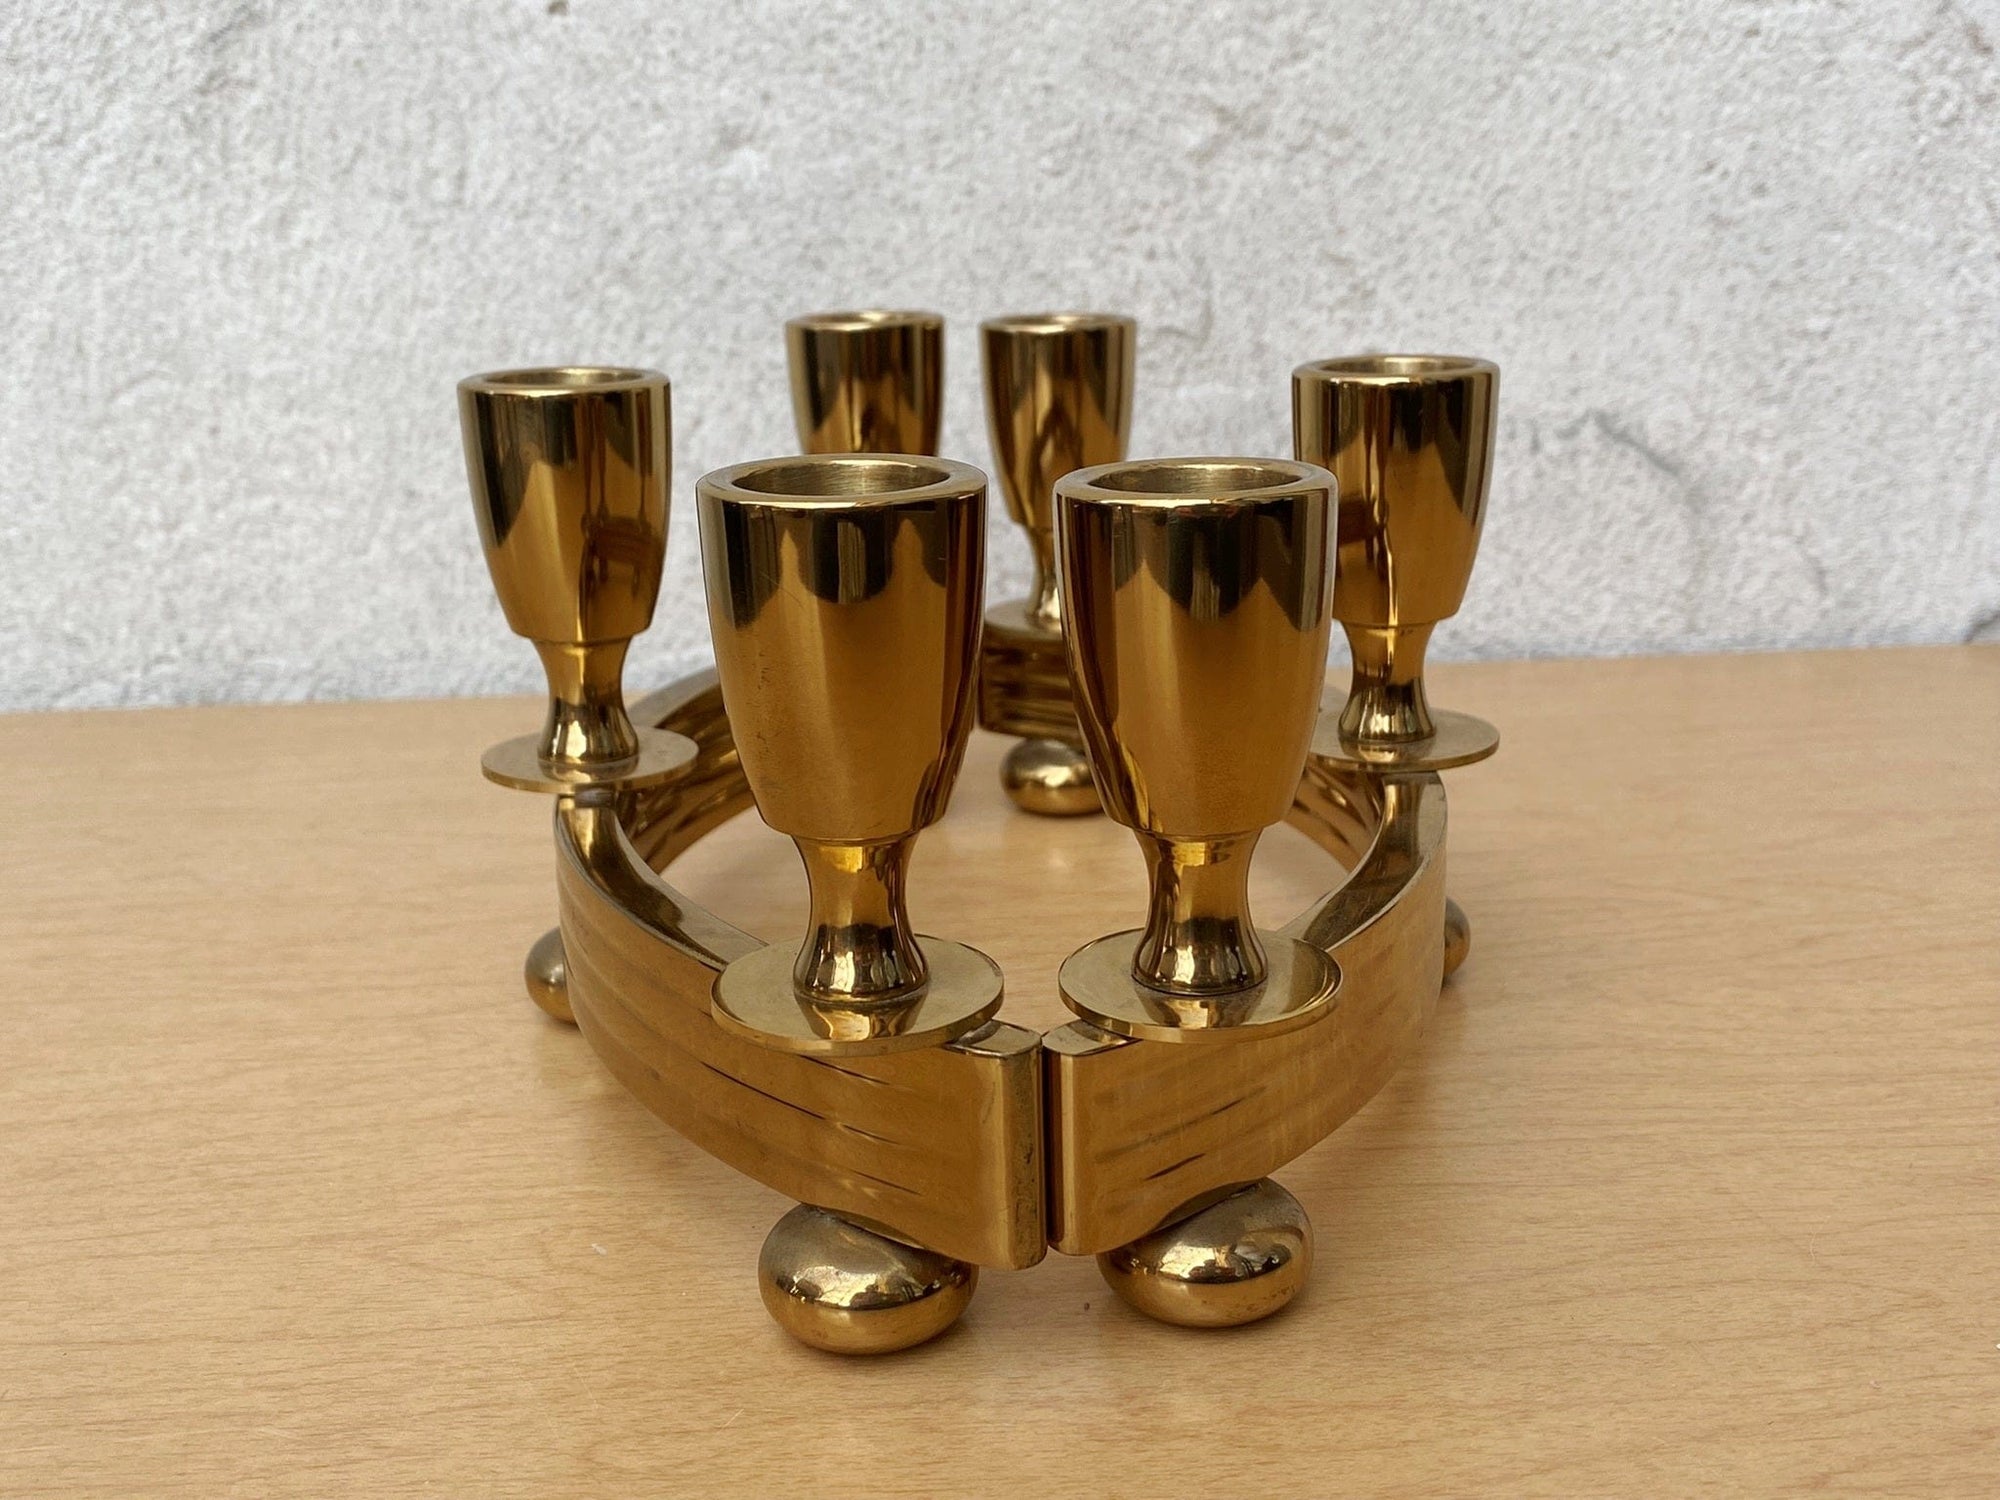 I Like Mike's Mid Century Modern candle holders Pair Brass Deco Candlelabra Candle Stick Holders by Dirilyte #1